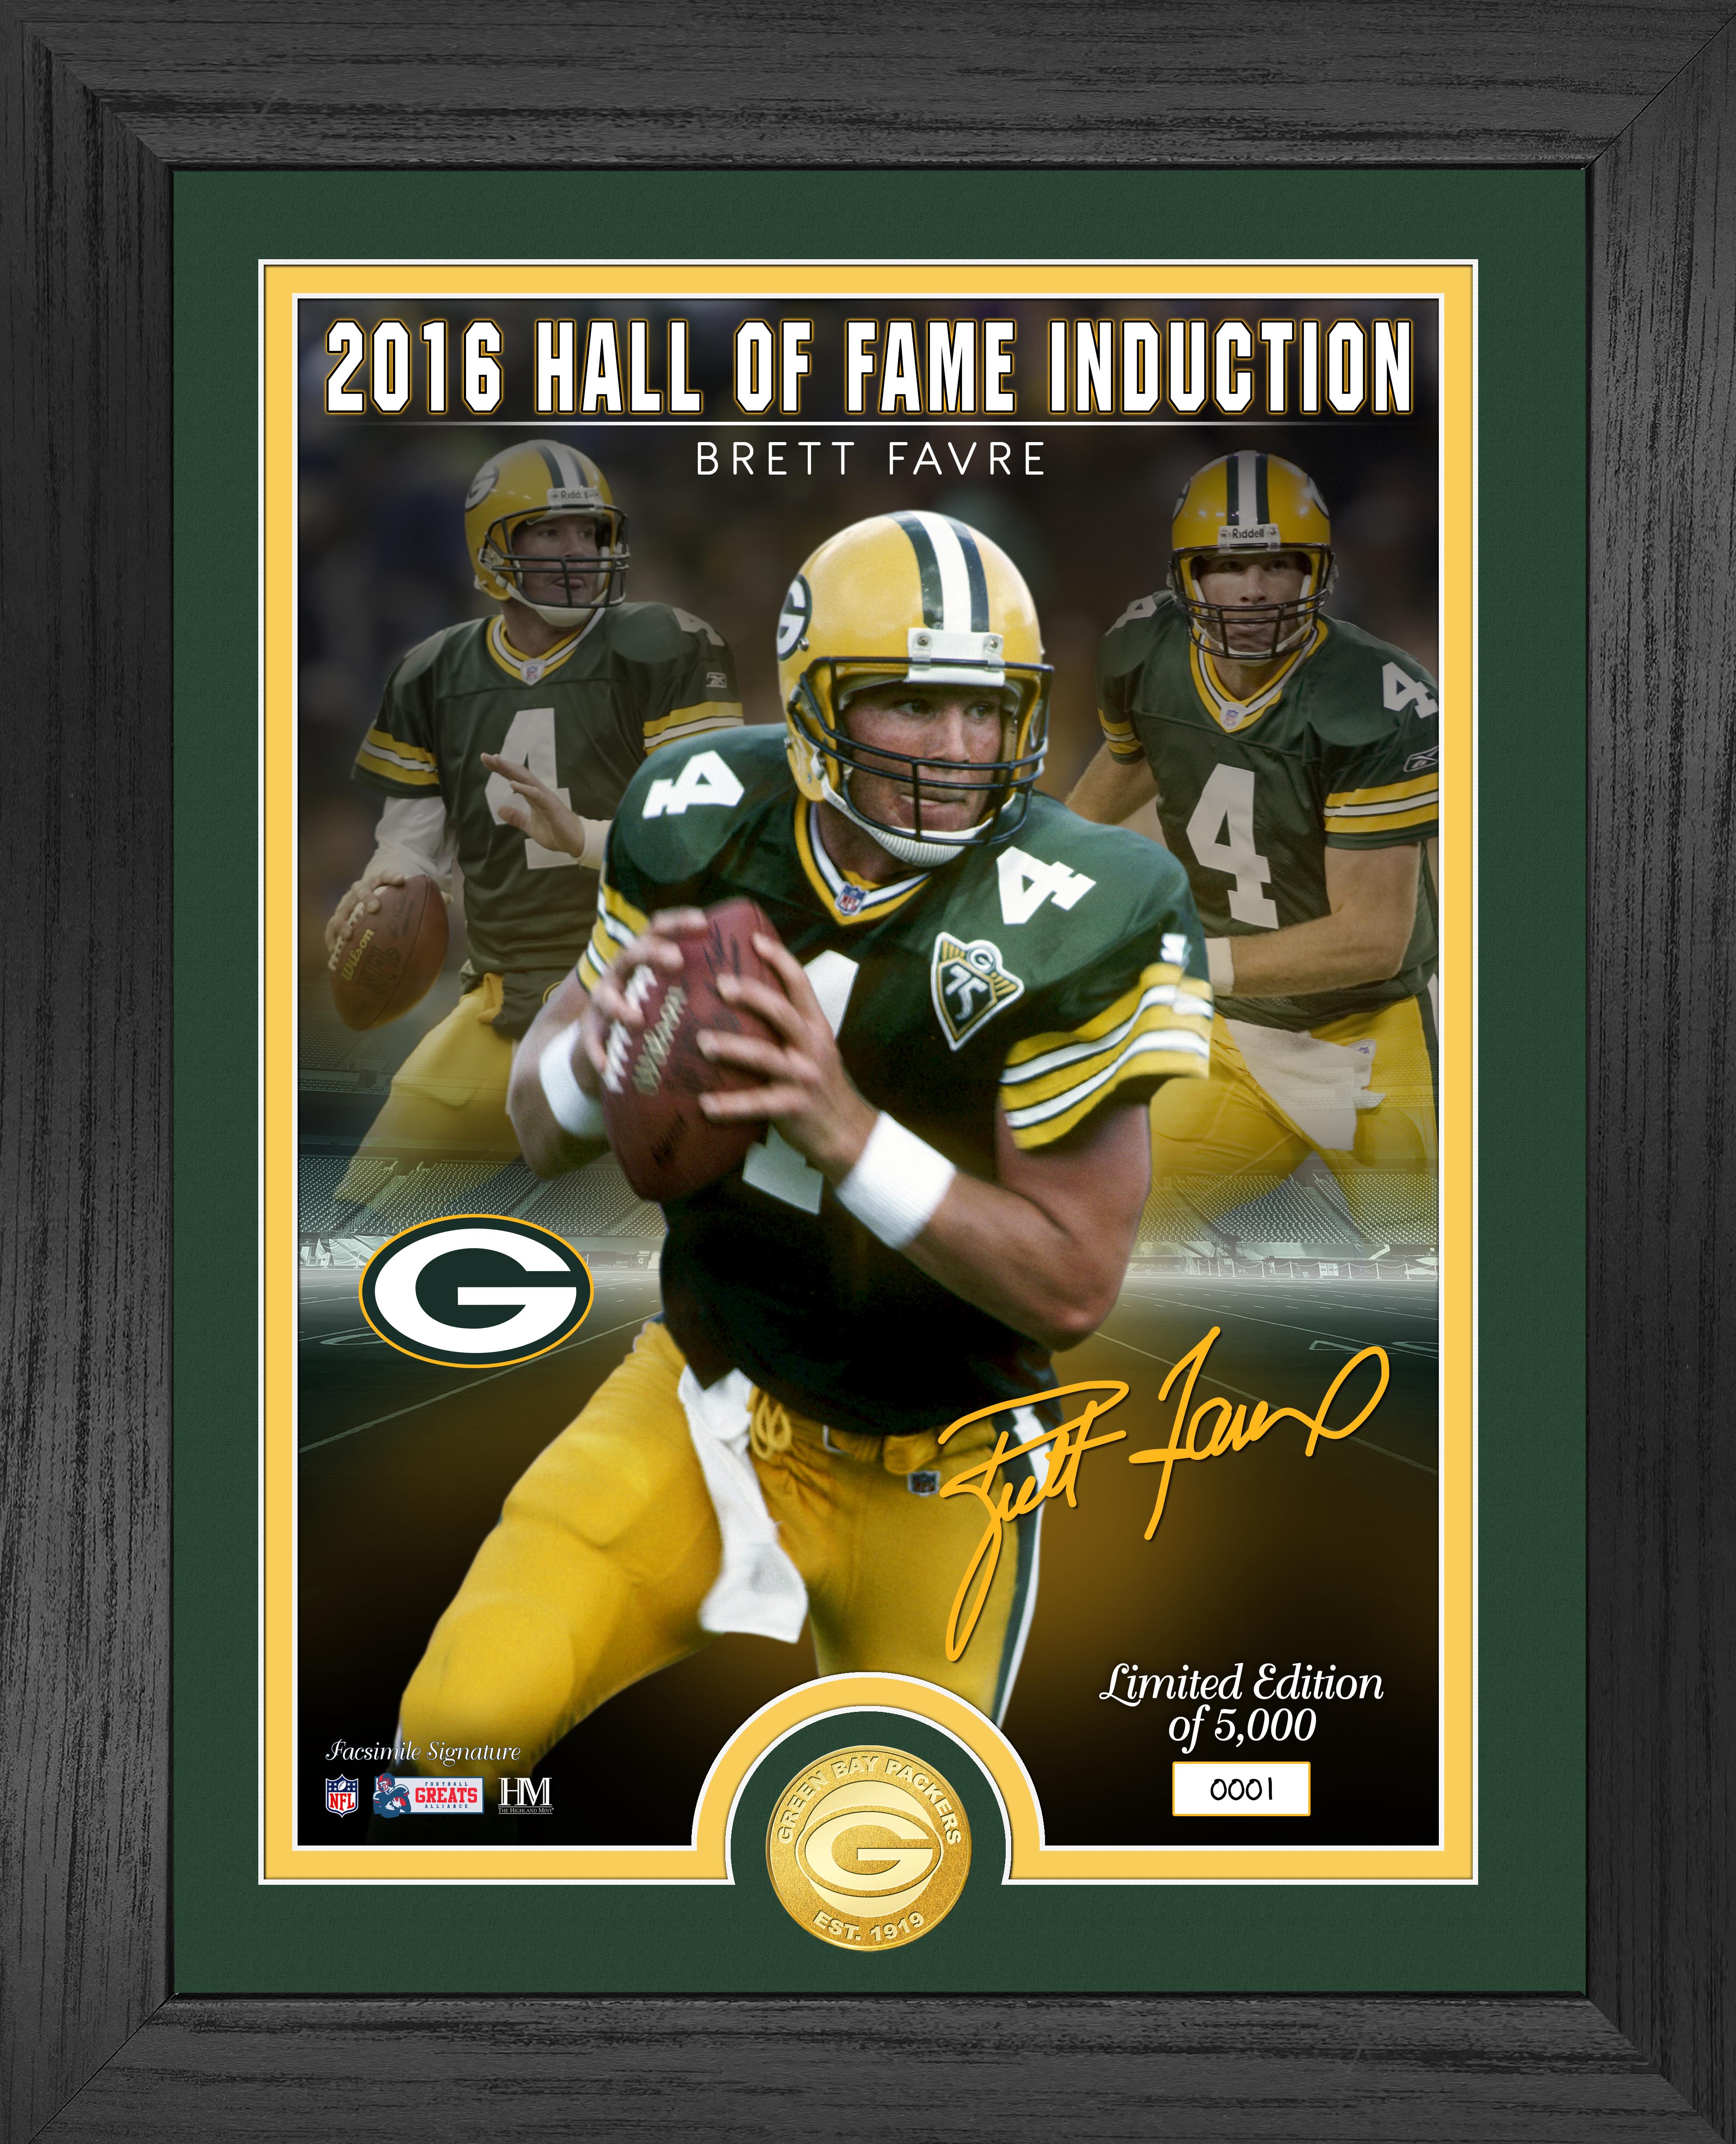 Brett Favre Packers Hall of Fame Induction Bronze Coin Signature Photo Mint